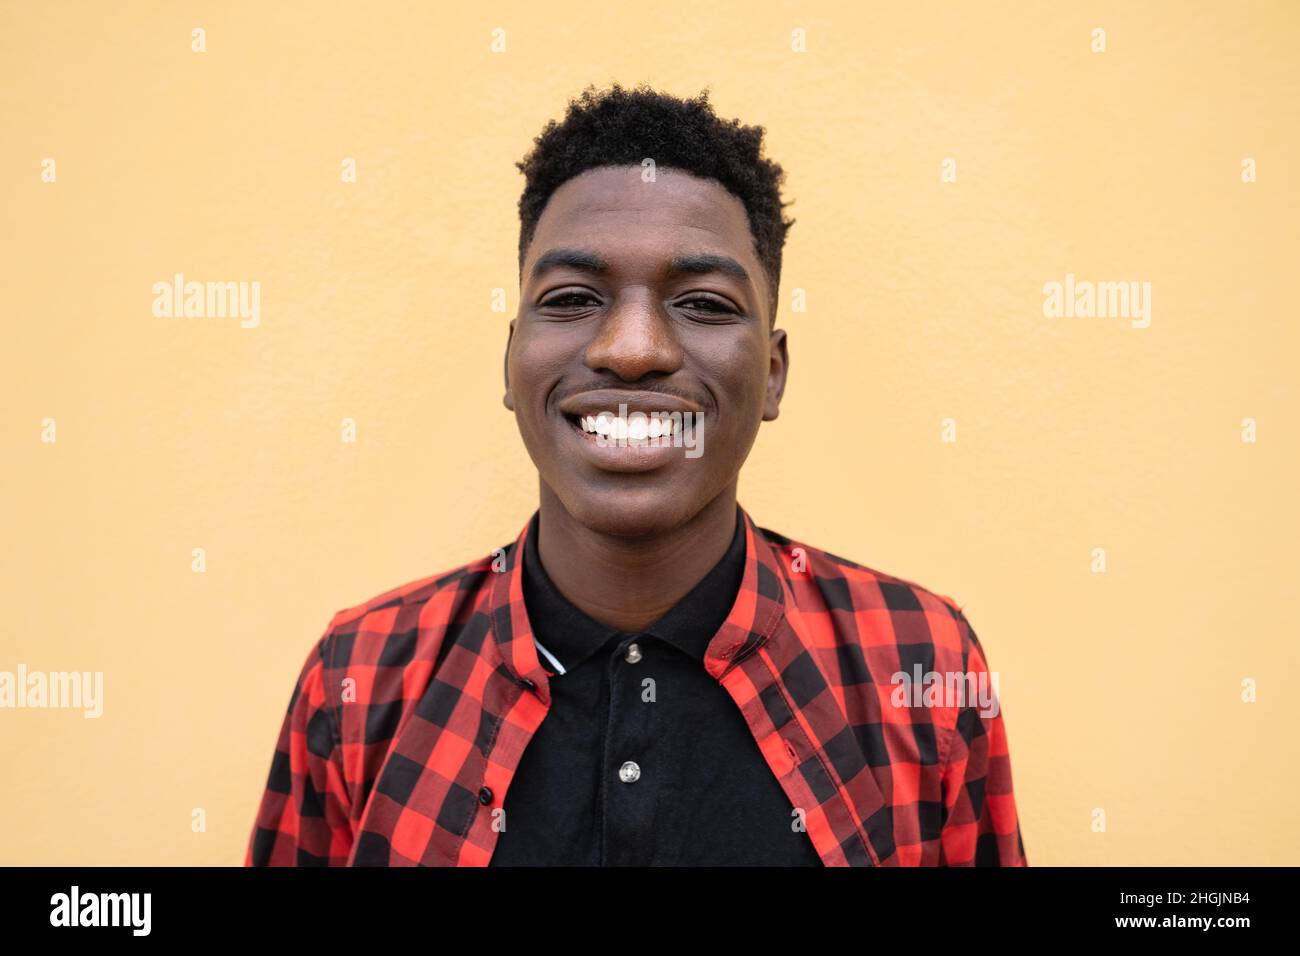 Portrait of happy young African teenager smiling in front of camera Stock Photo